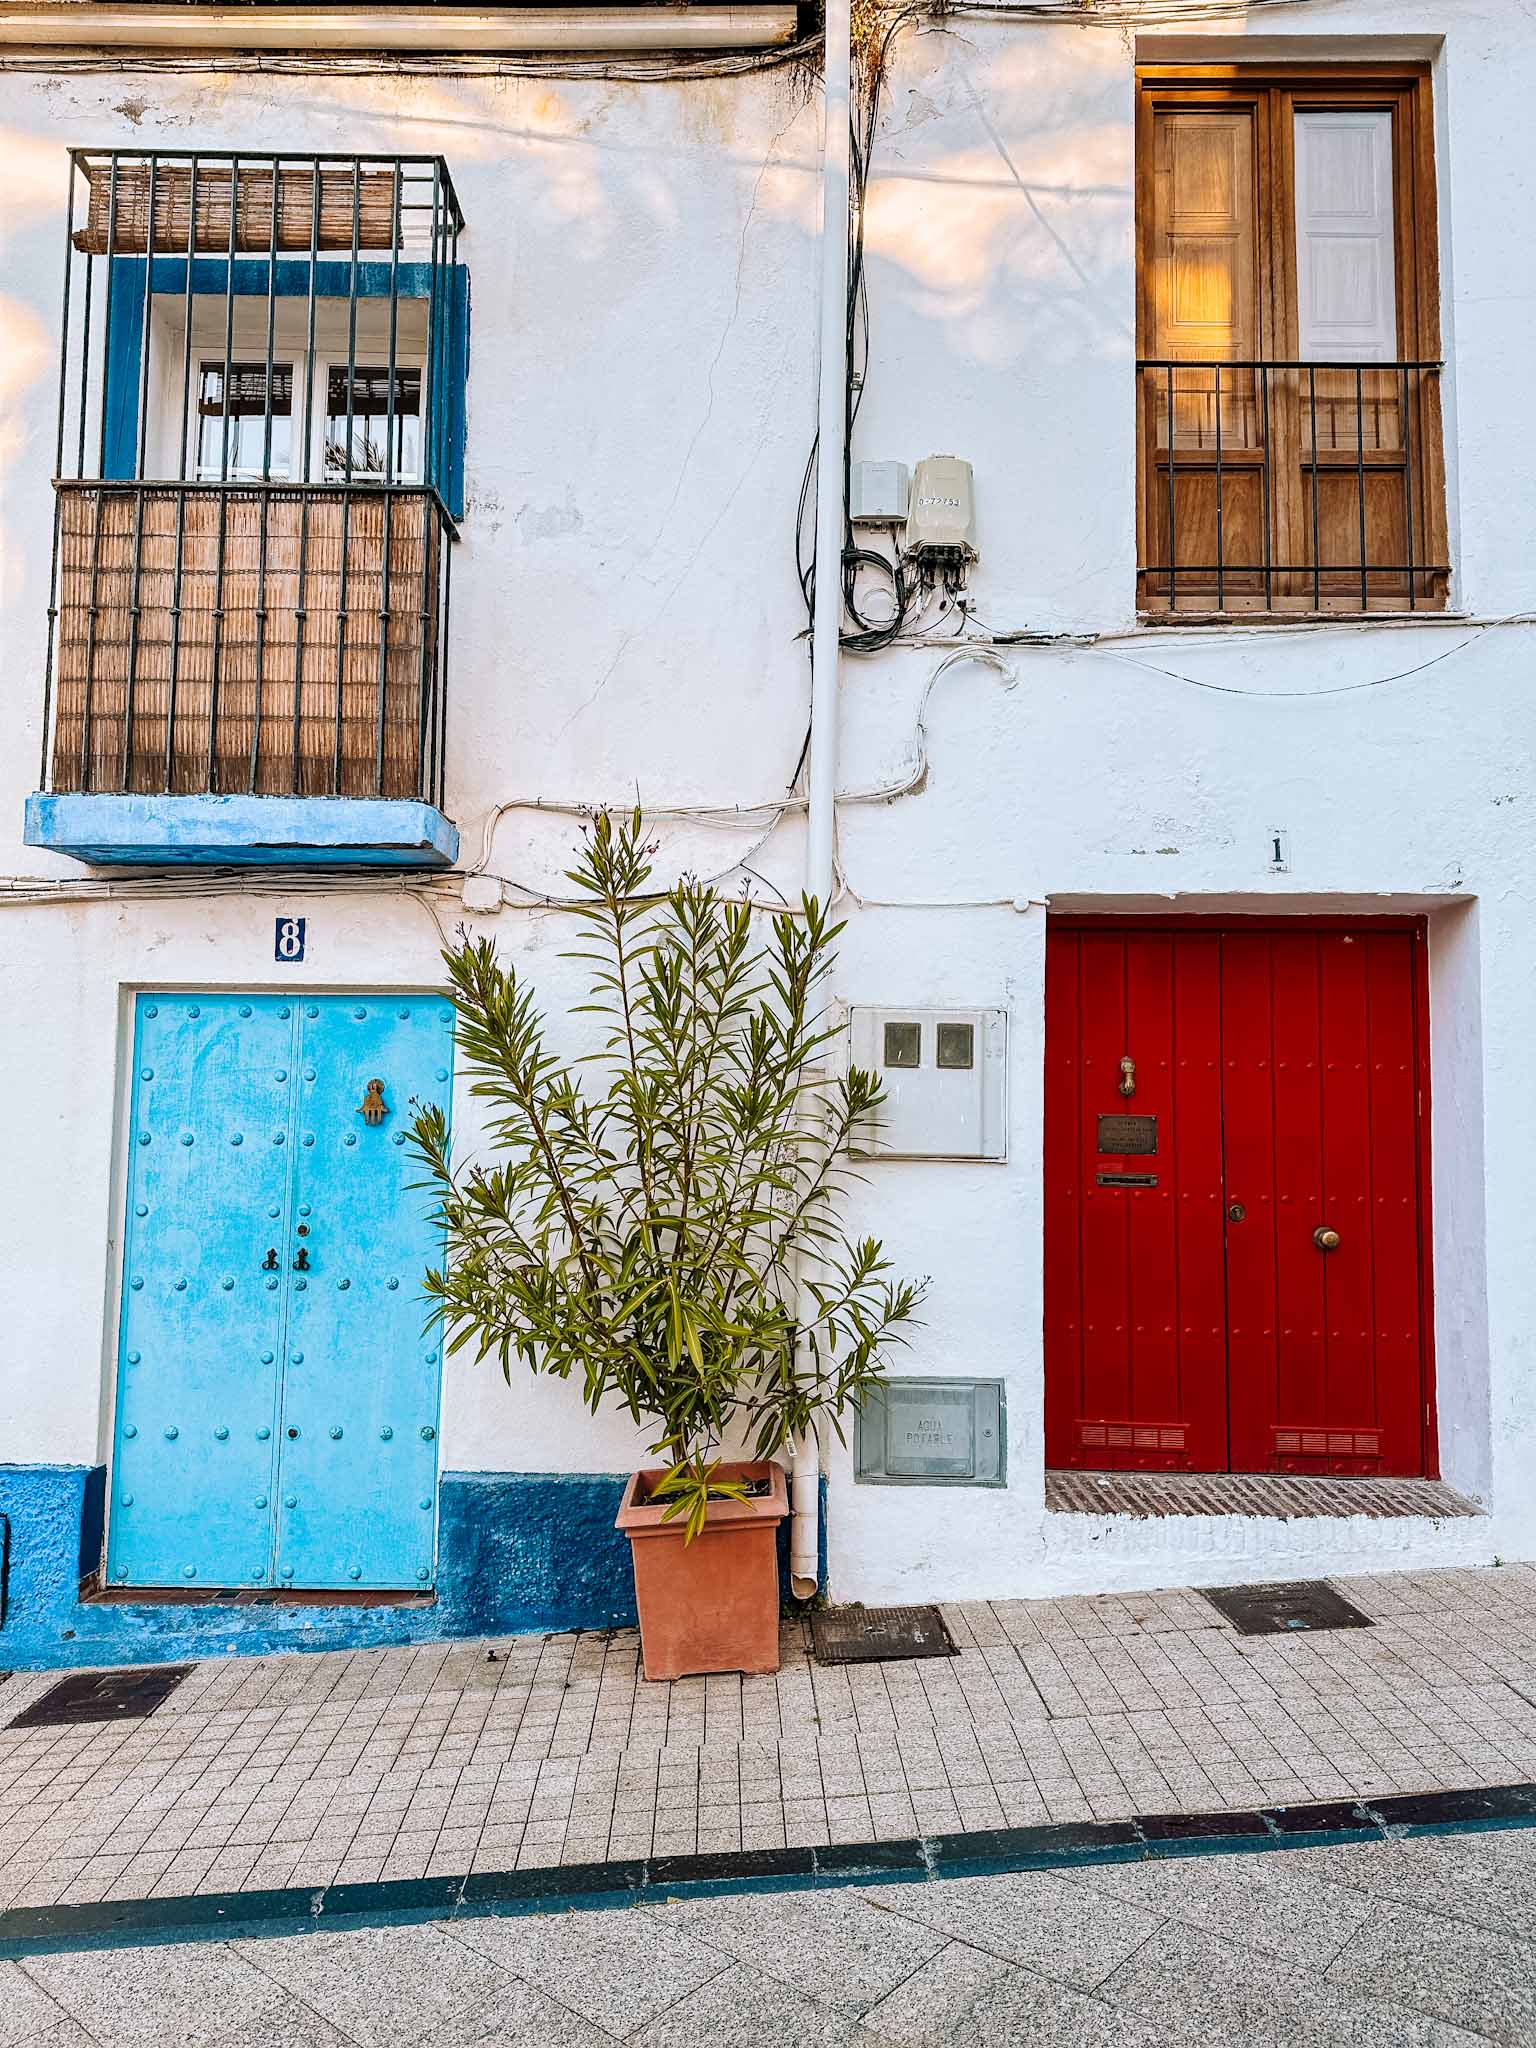 Best Instagram photo spots and things to do in Marbella Old Town, Spain